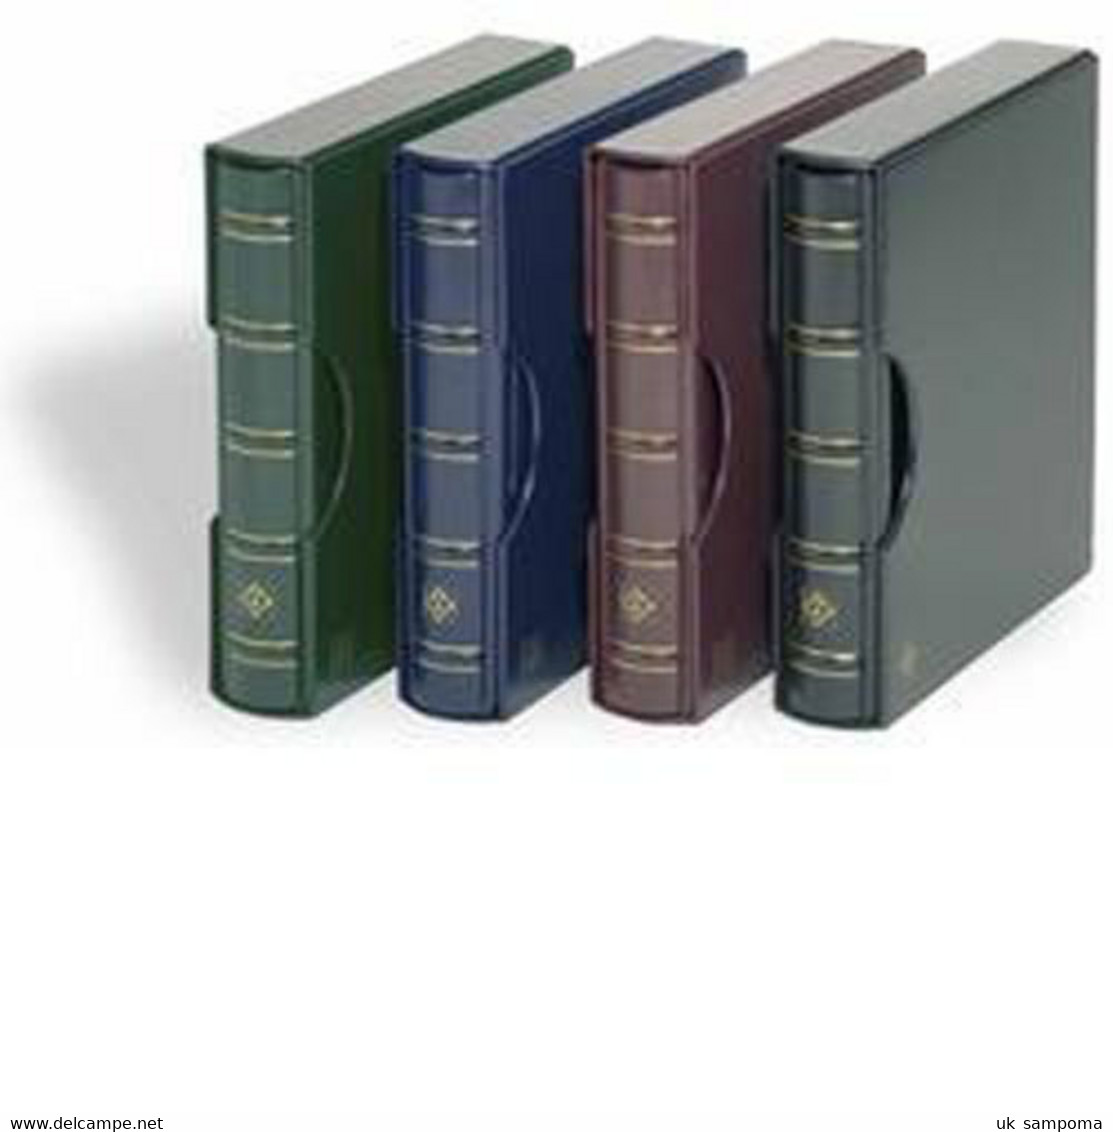 Turn-bar Binder PERFECT DP, In Classic Design With Slipcase, Blue - Large Format, Black Pages